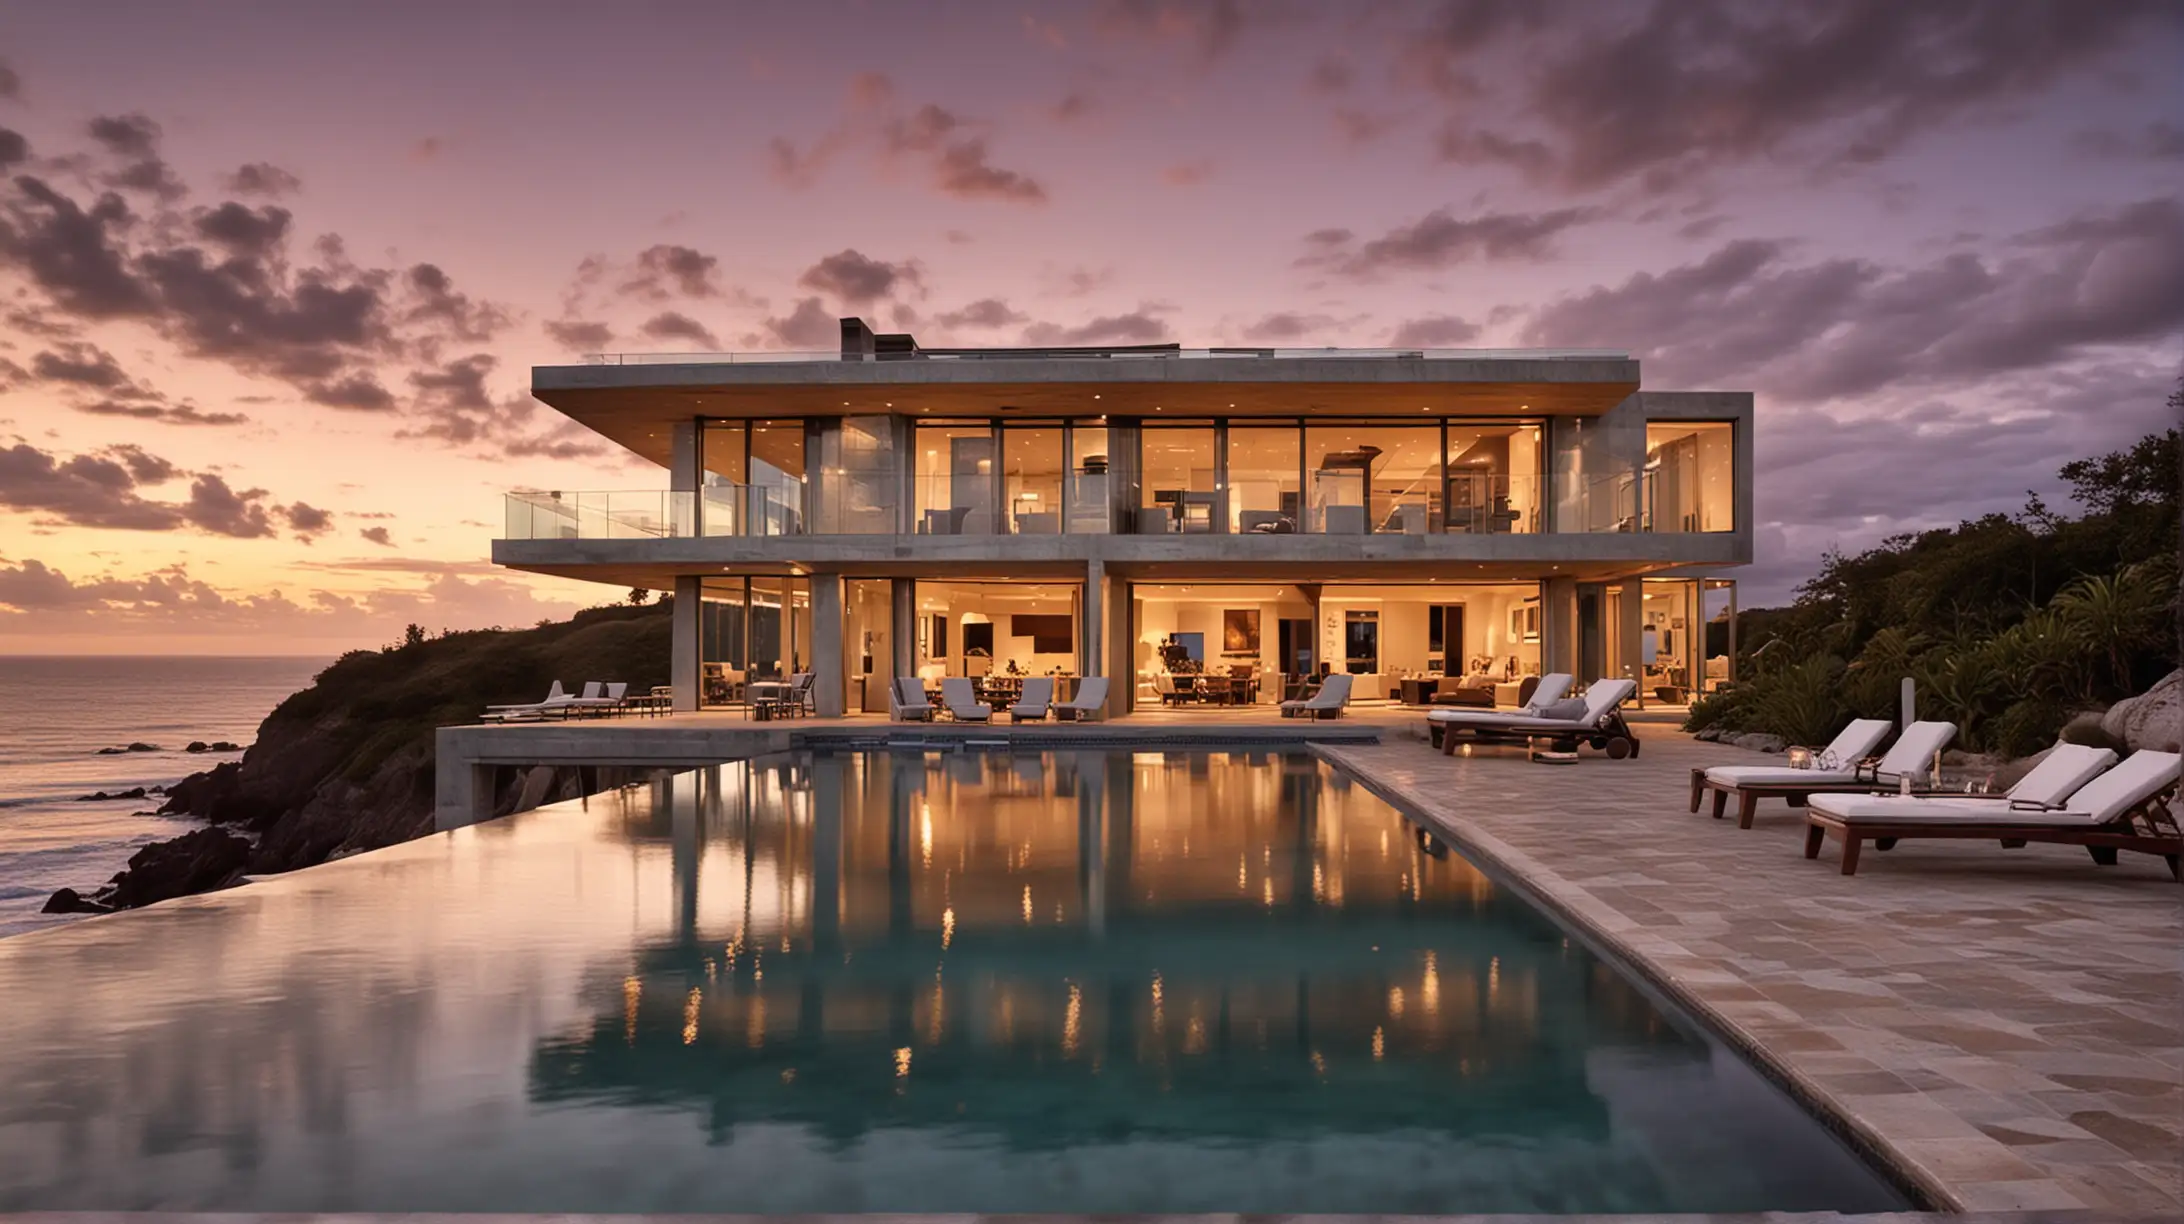 Contemporary Oceanfront Vacation Home with Infinity Pool at Sunset